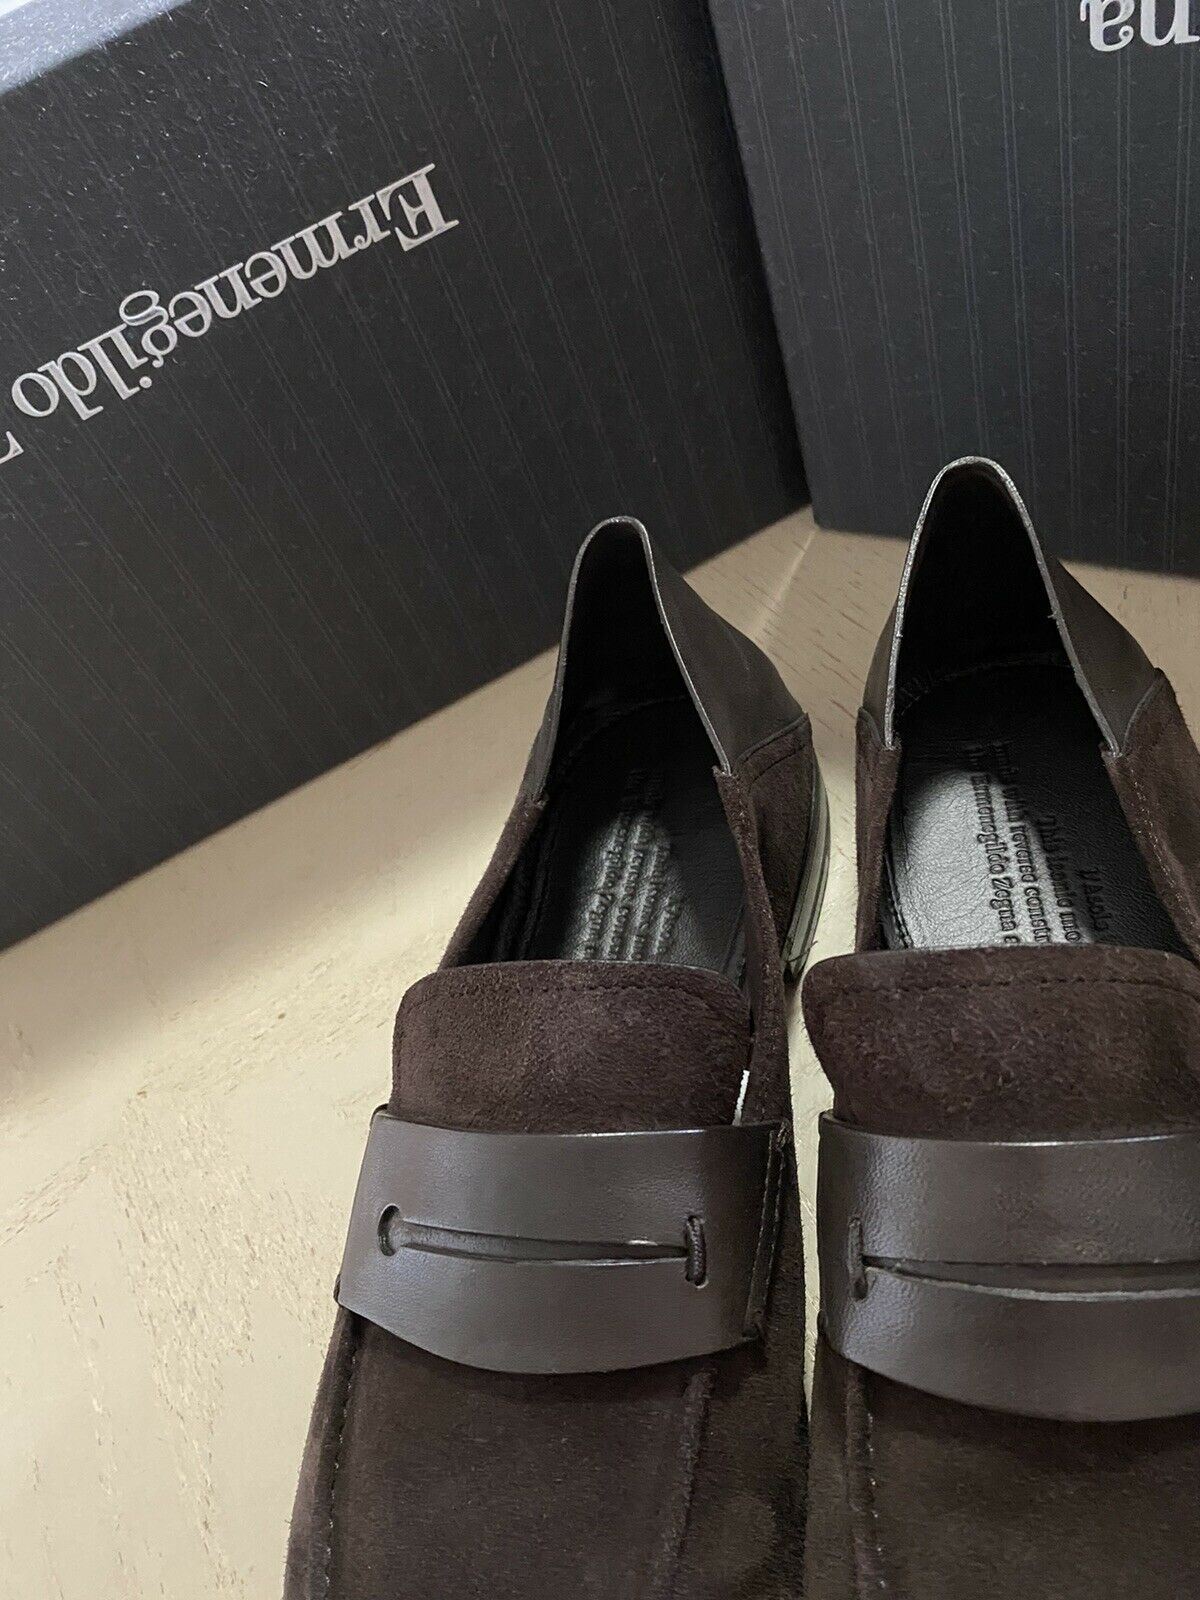 New $750 Ermenegildo Zegna Iconic Moccasin Suede Loafers Shoes DK Brown 10 US